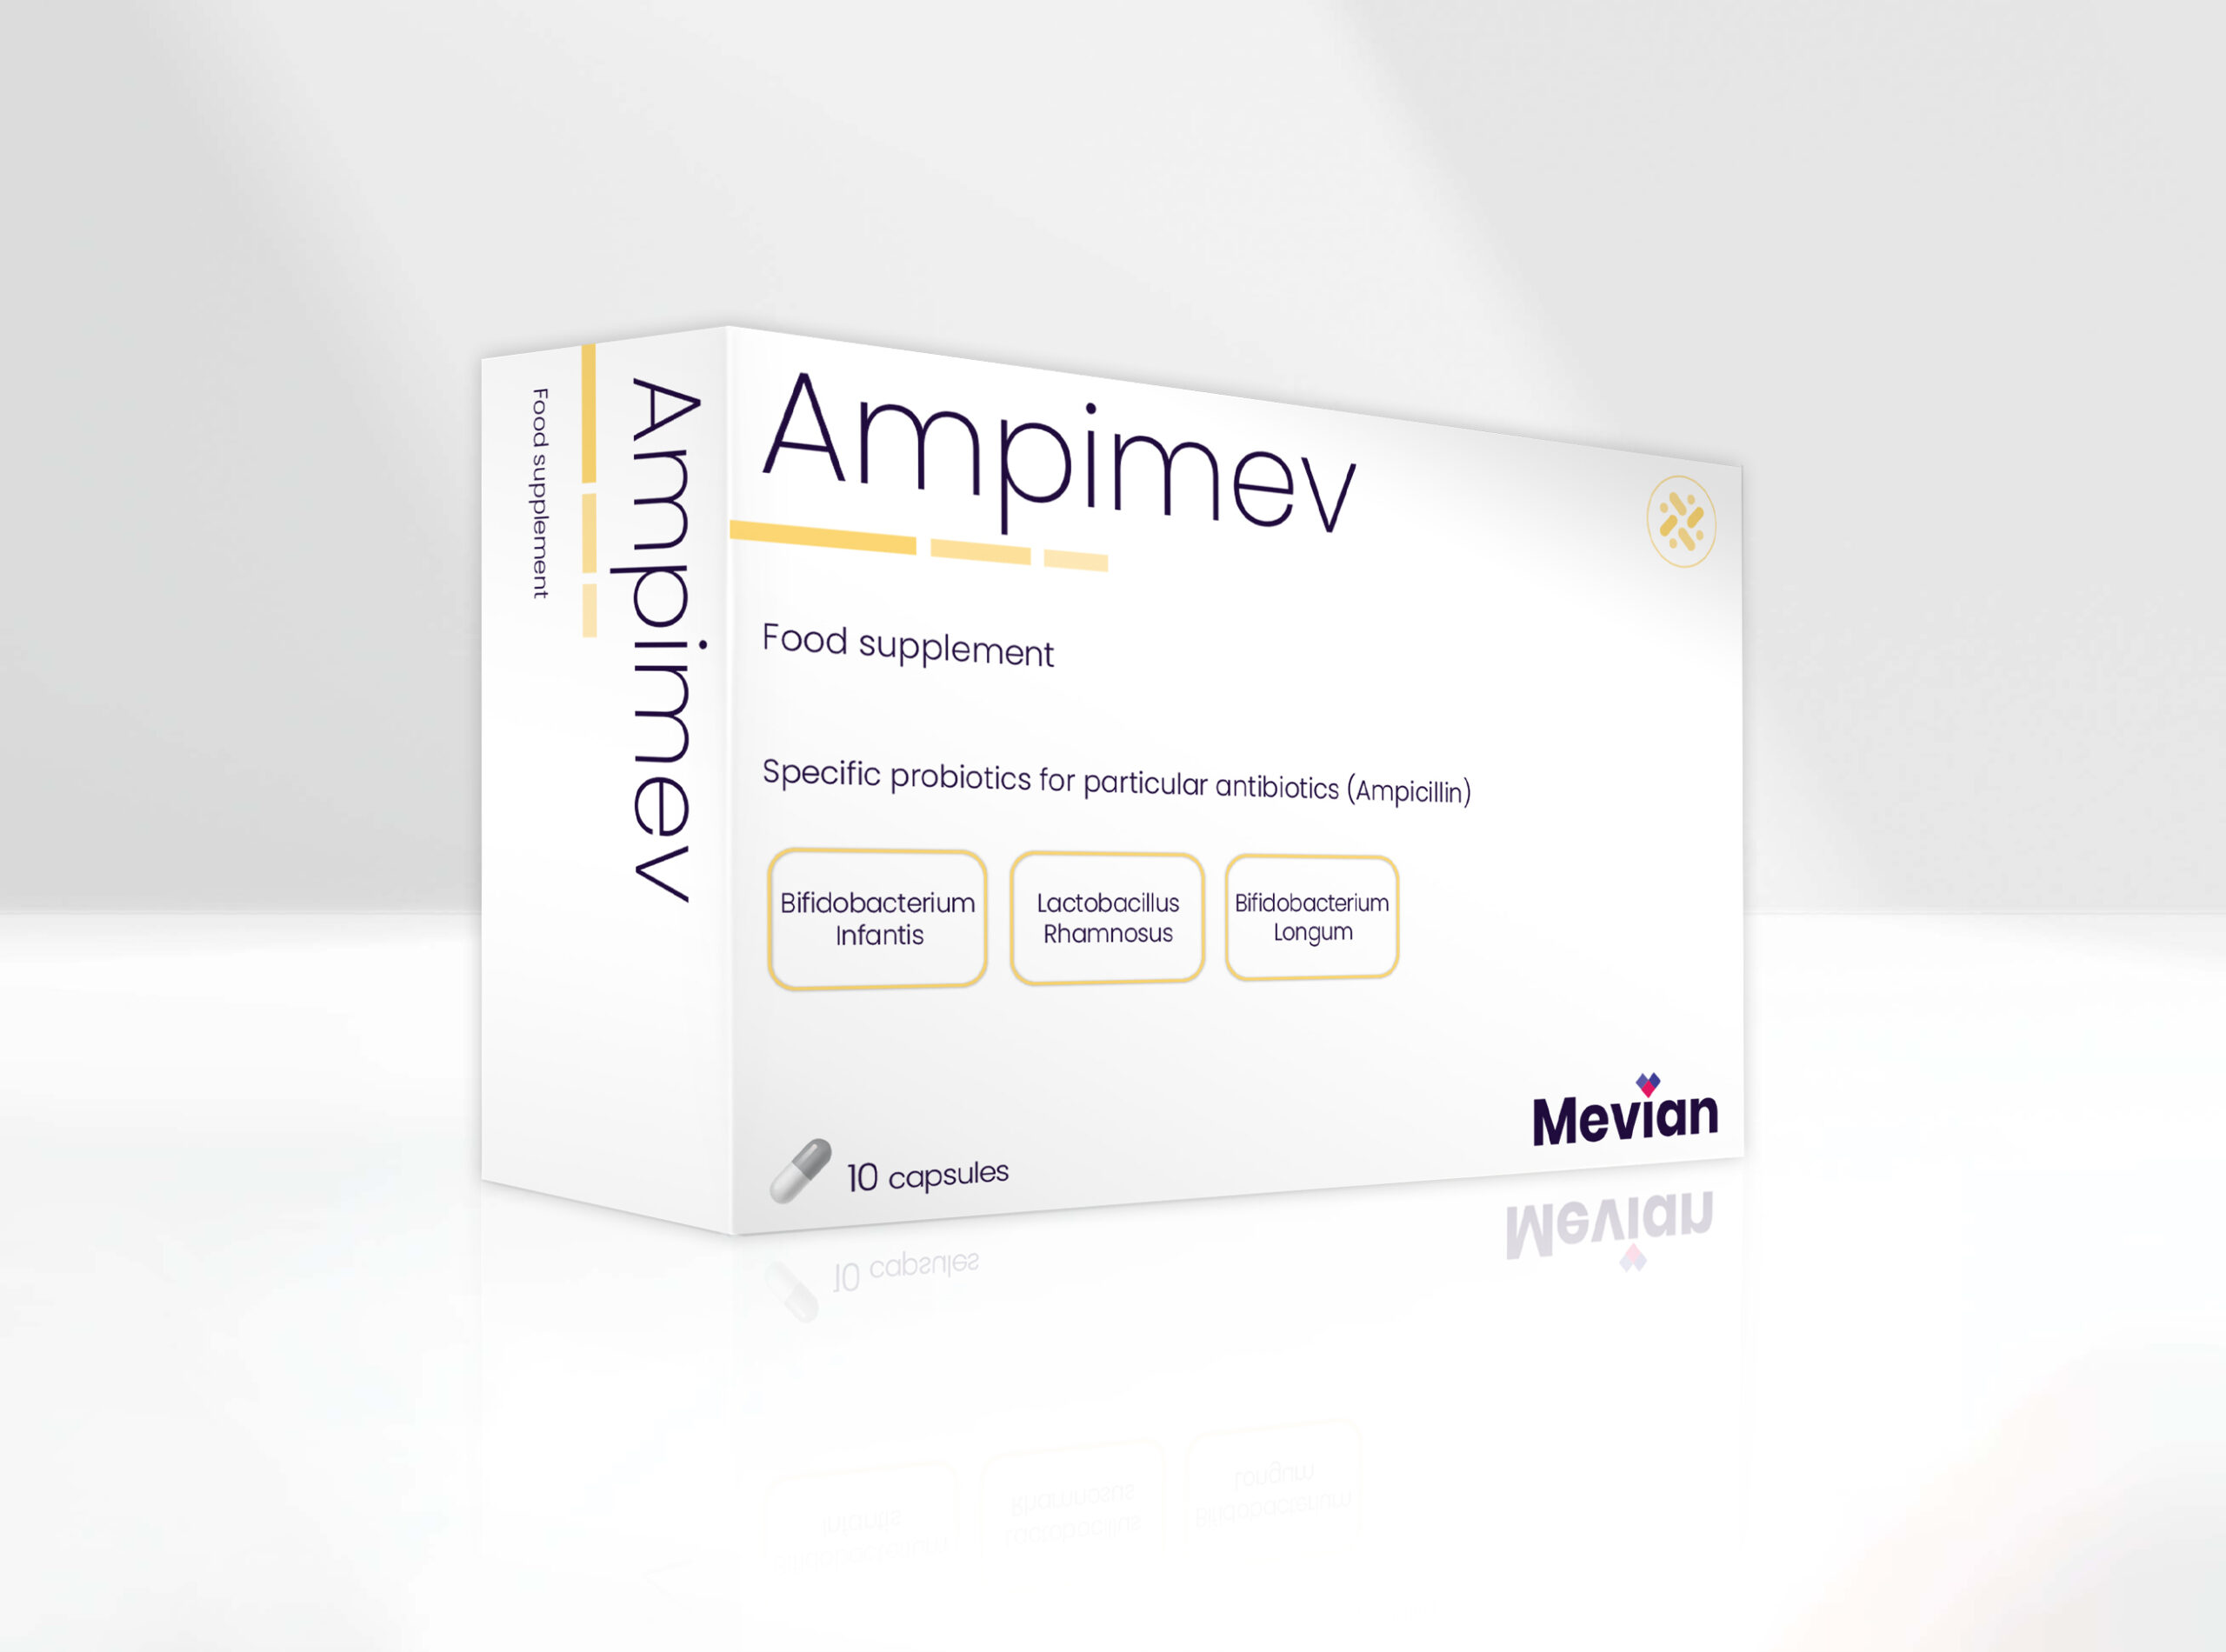 Ampimev is a novel approach in Antibiotic-Associated Side Effects (Diarrhoea, other, etc.) with strains selected for a particular group of antibiotics (Ampicillin) based on probiotic strains' sensitivity to antibiotic activity.